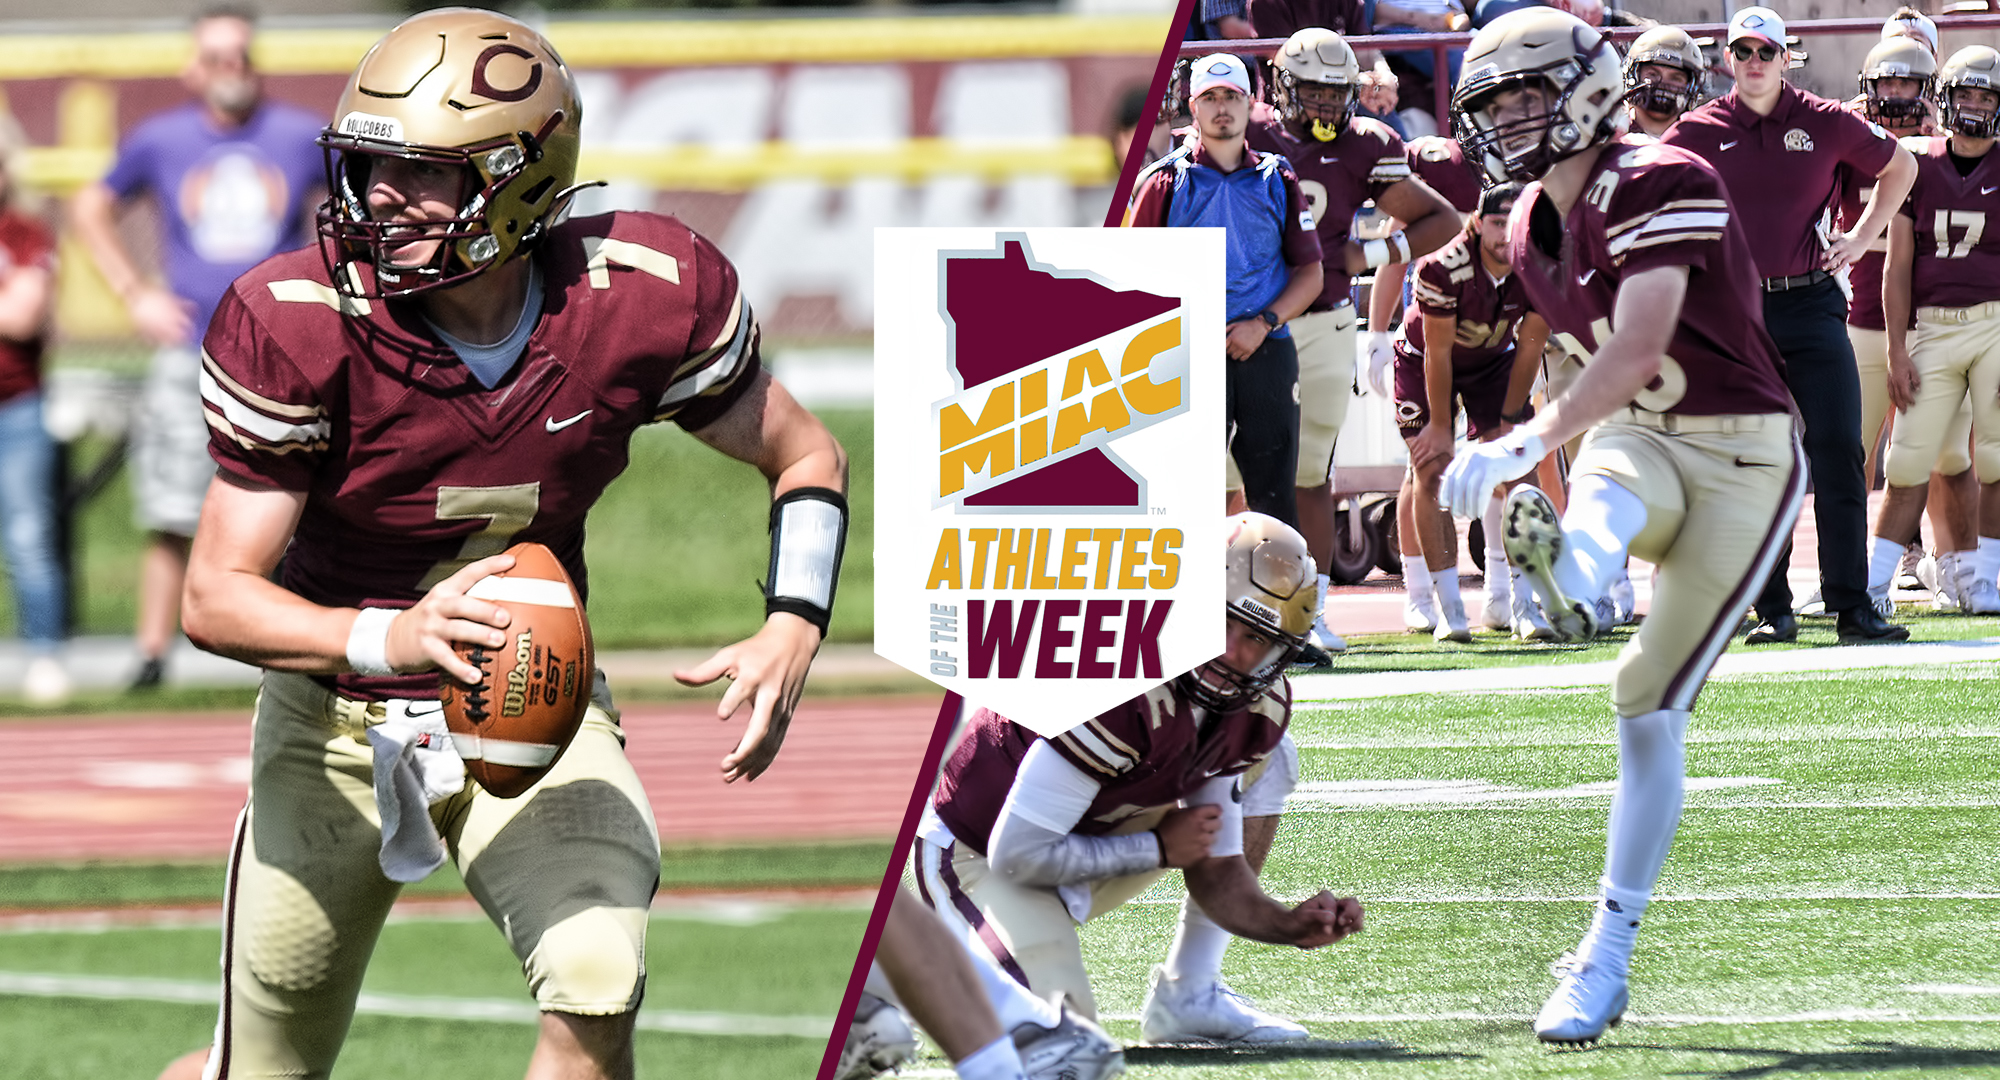 Senior Tanner Dubois (L) was named the MIAC Offensive Player of the Week and freshman Damien Silus was named the MIAC Special Teams Player of the Week.